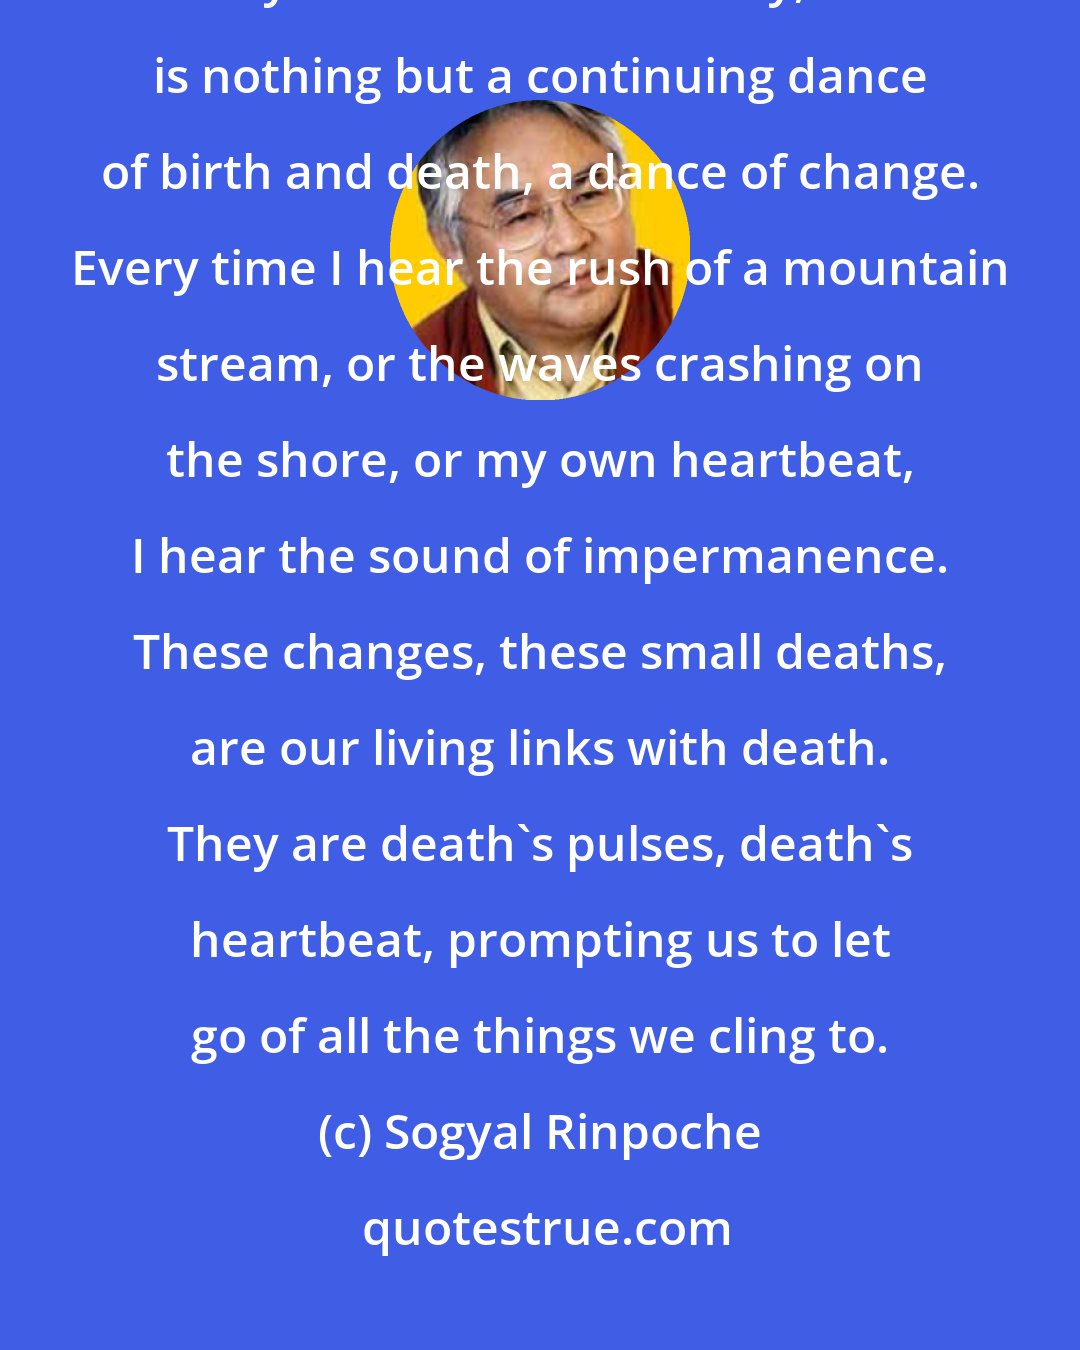 Sogyal Rinpoche: There would be no chance at all of getting to know death if it happened only once. But fortunately, life is nothing but a continuing dance of birth and death, a dance of change. Every time I hear the rush of a mountain stream, or the waves crashing on the shore, or my own heartbeat, I hear the sound of impermanence. These changes, these small deaths, are our living links with death. They are death's pulses, death's heartbeat, prompting us to let go of all the things we cling to.